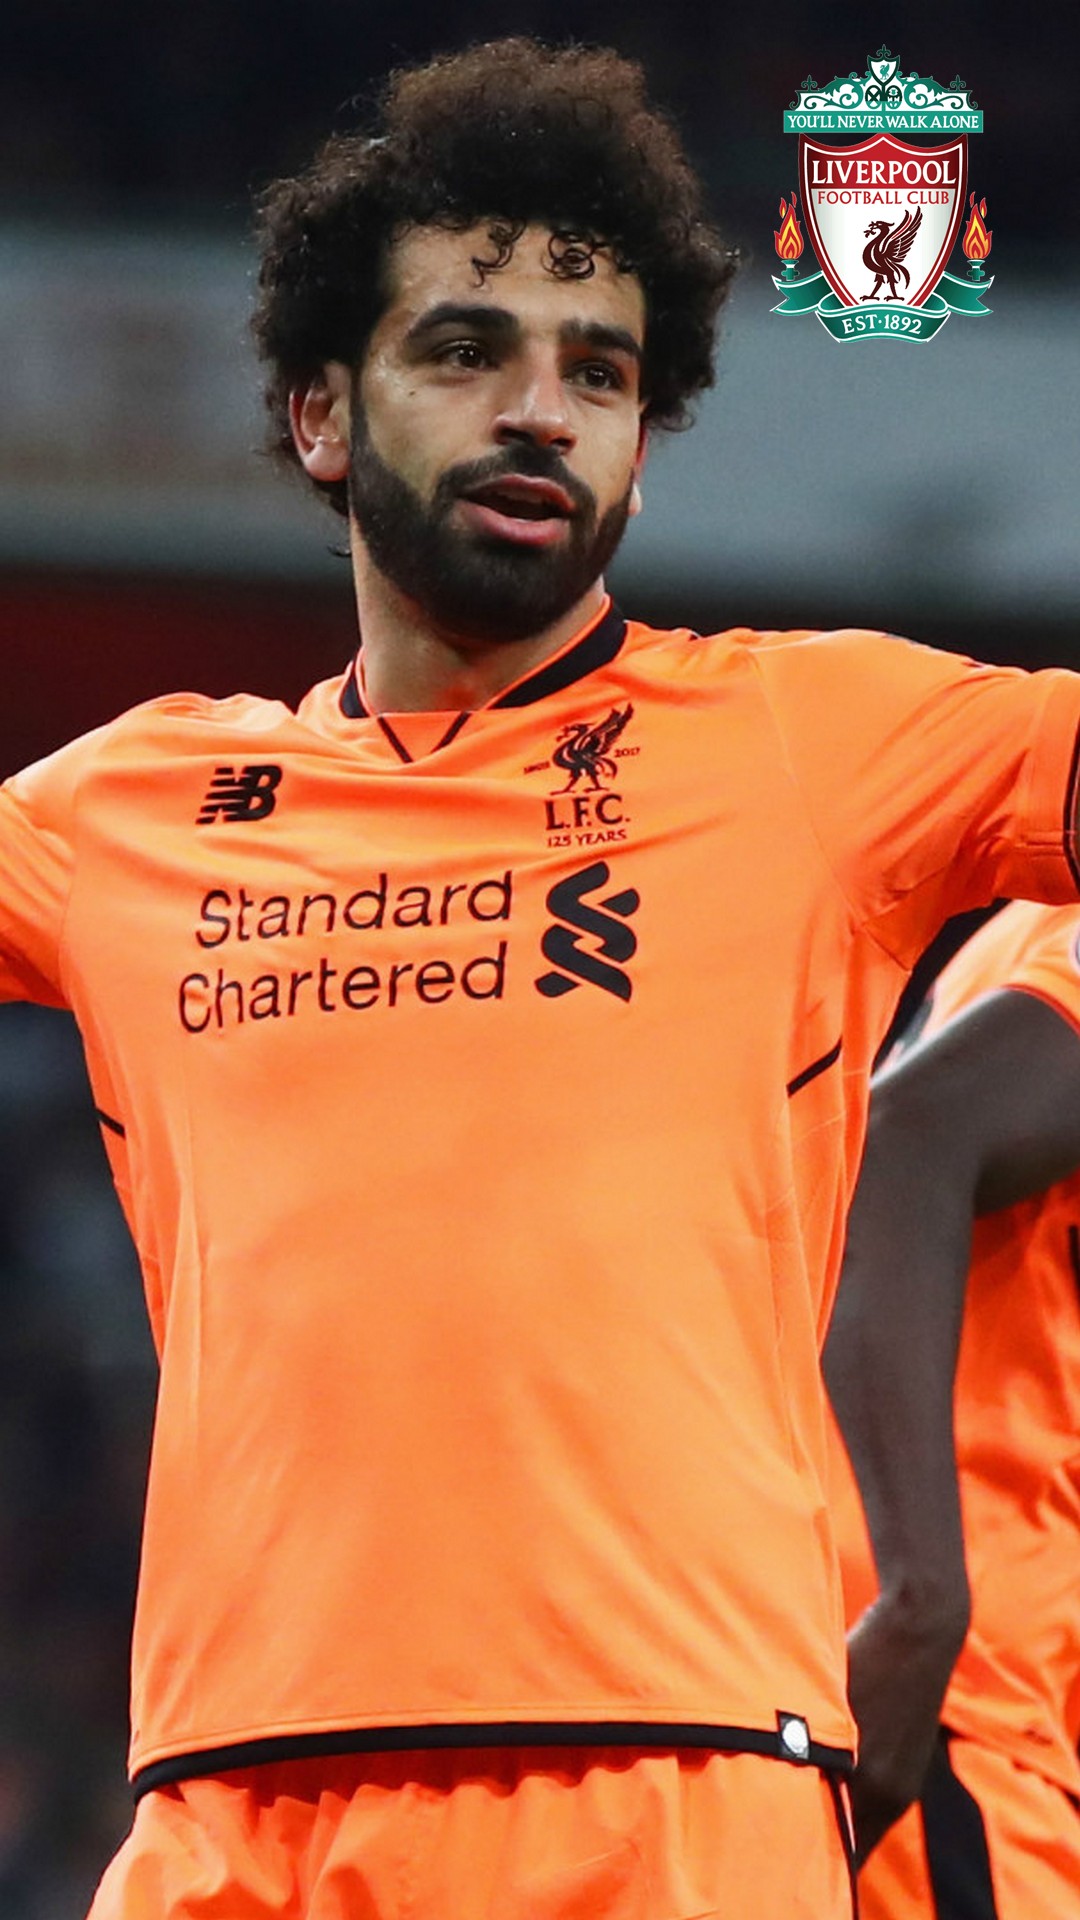 Wallpaper Liverpool Mohamed Salah Android With Image - Anfield Statium - HD Wallpaper 